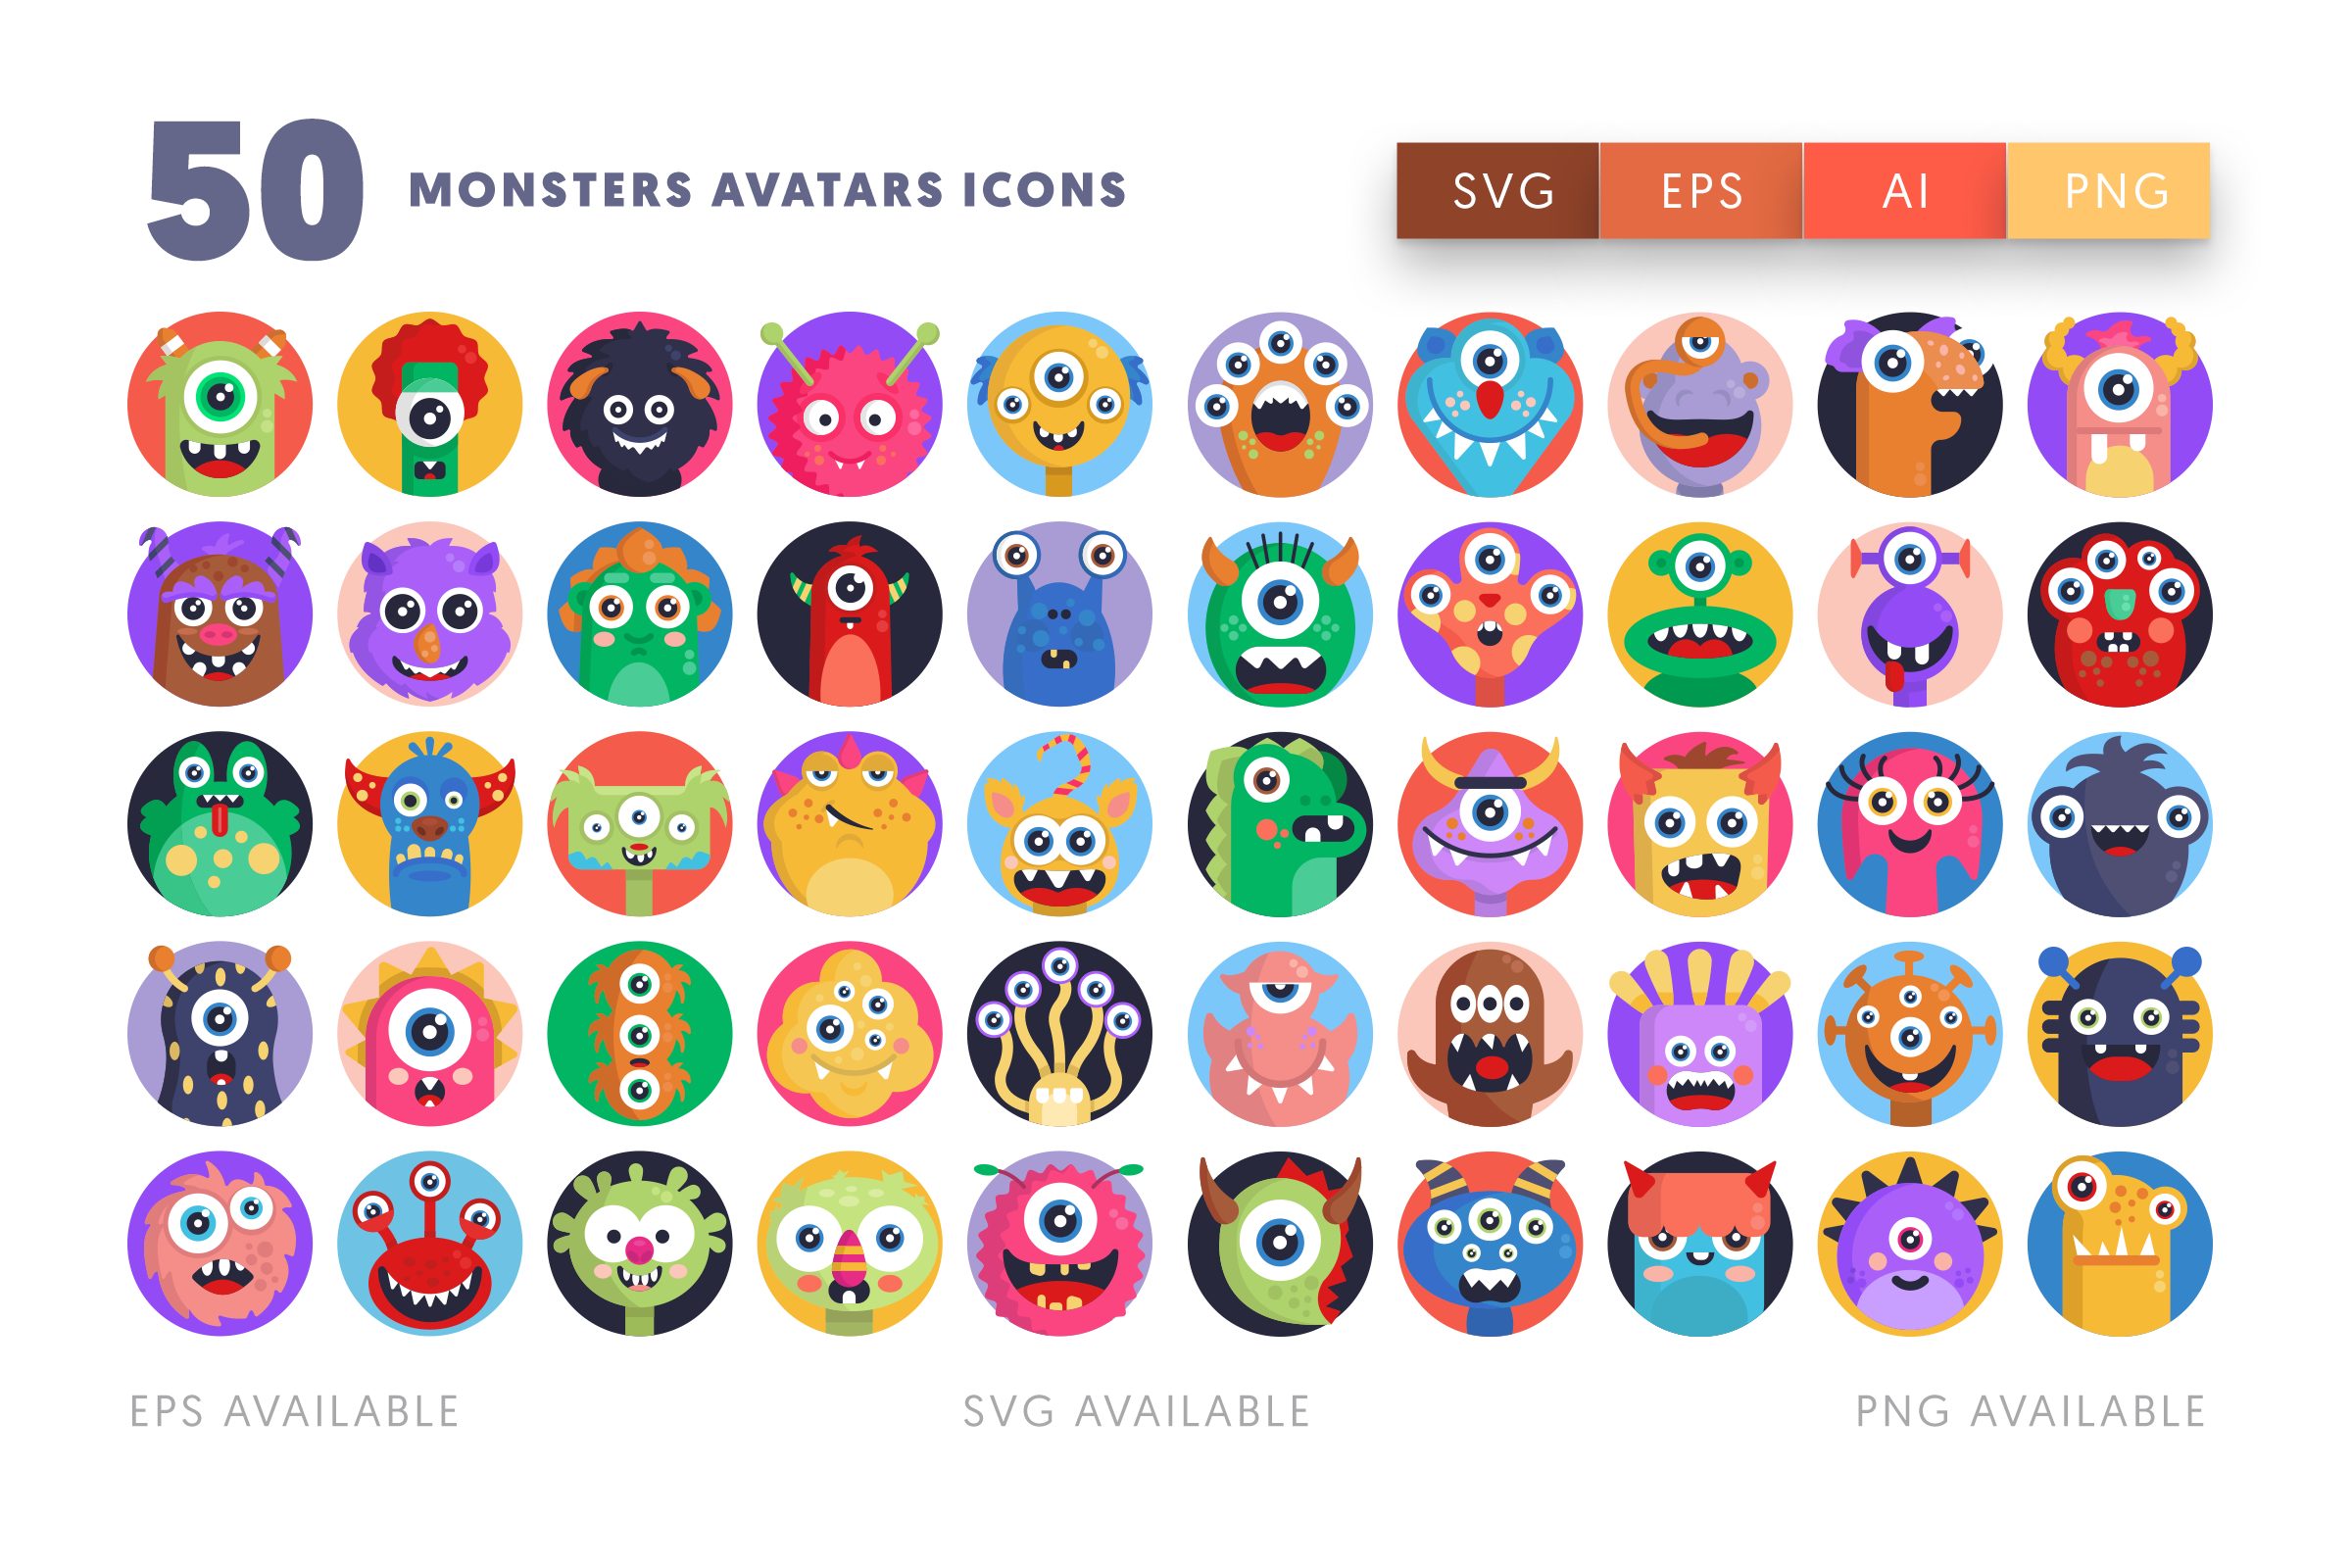 Monsters Avatars icons png/svg/eps